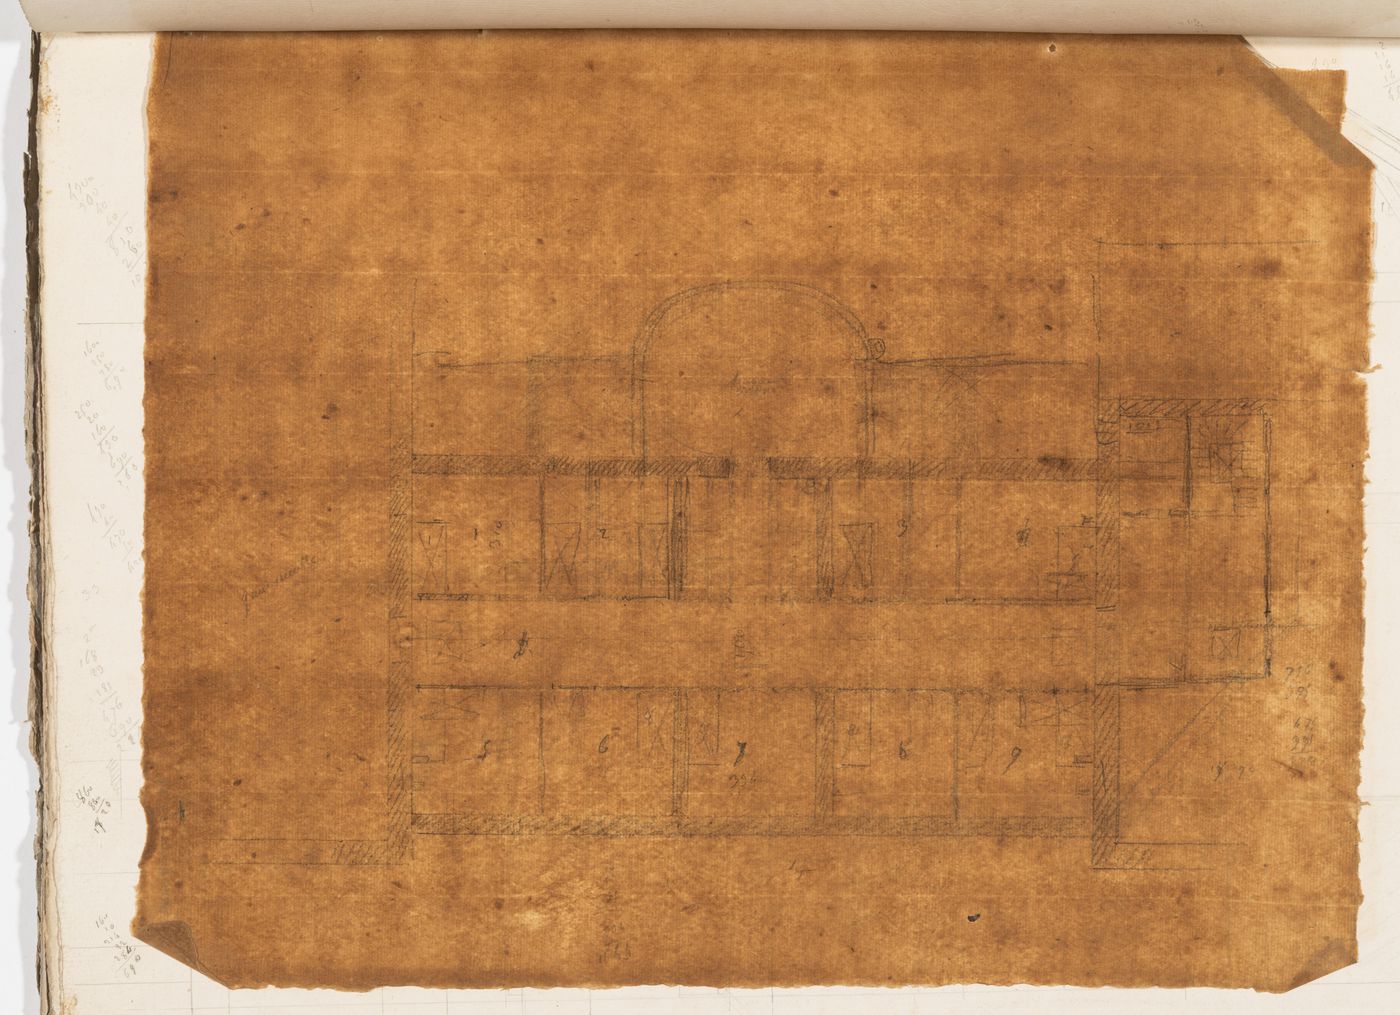 Project no. 9 for a country house for comte Treilhard: Sketch plan, probably for the second floor